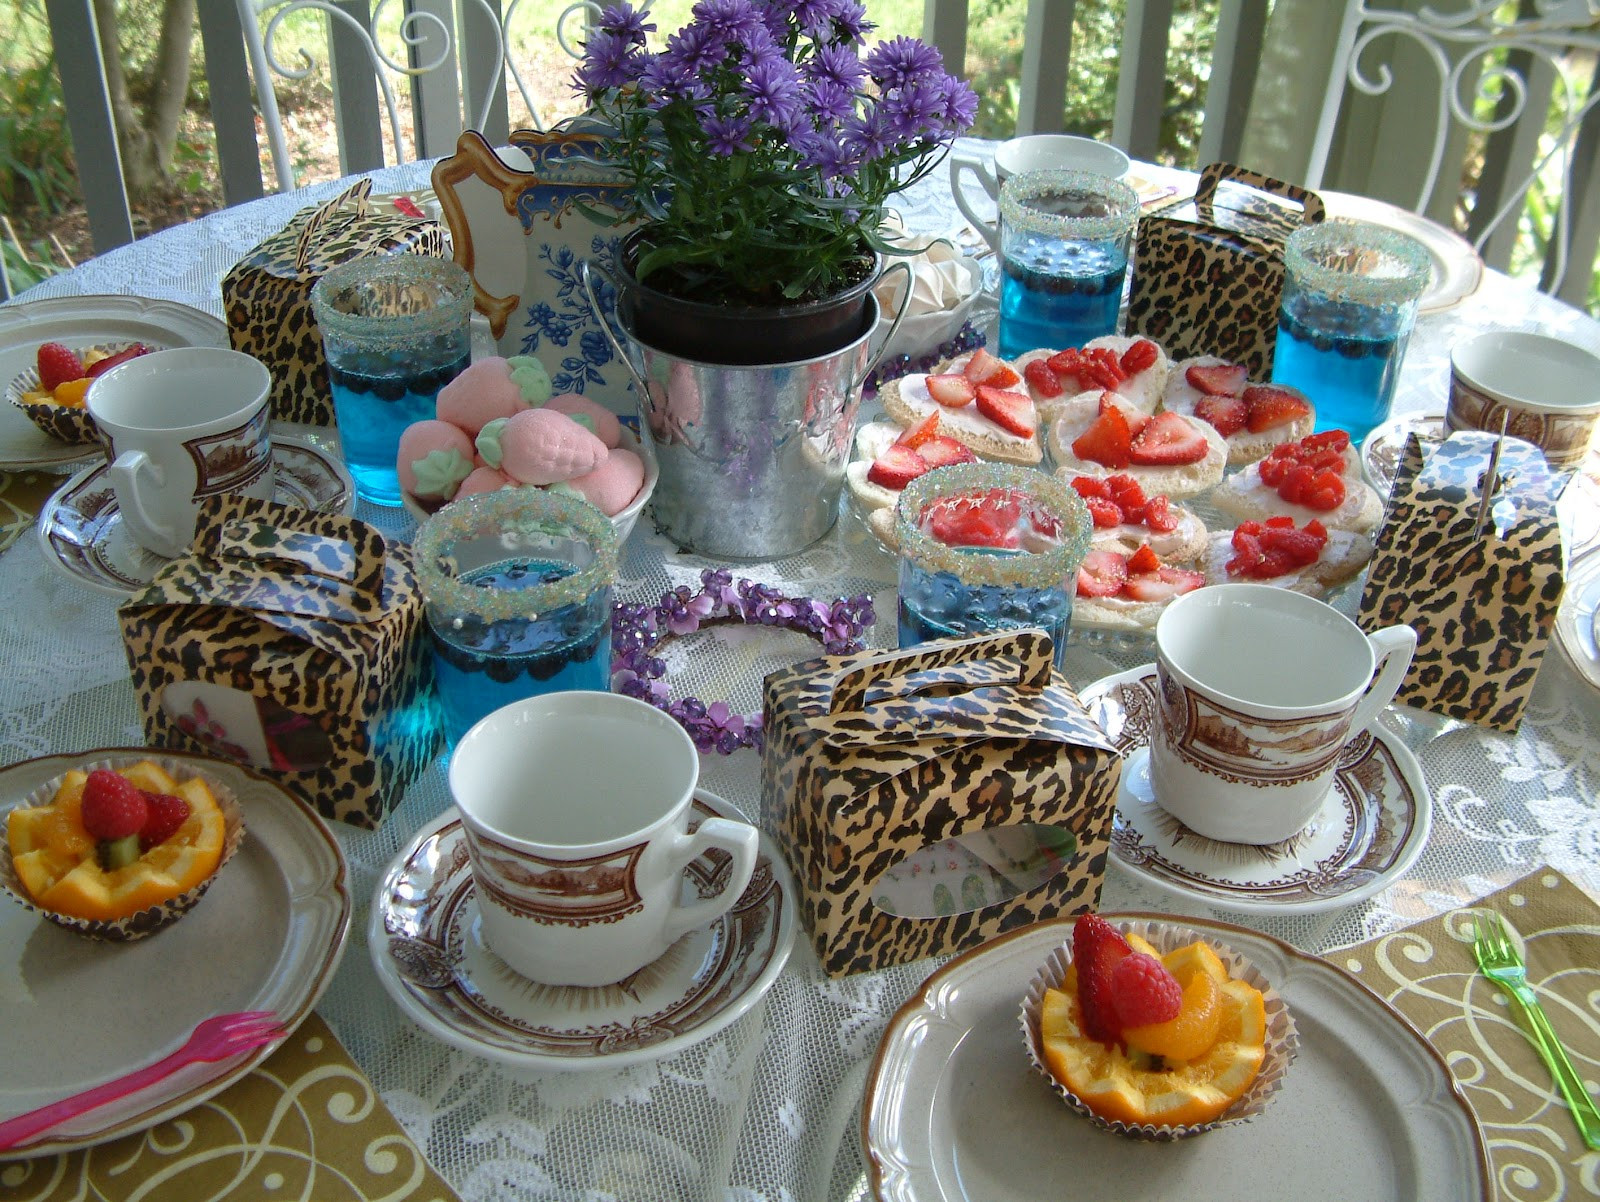 Table Setting Ideas For Tea Party
 April s Country Life Tea Party Table Settings For the Girls